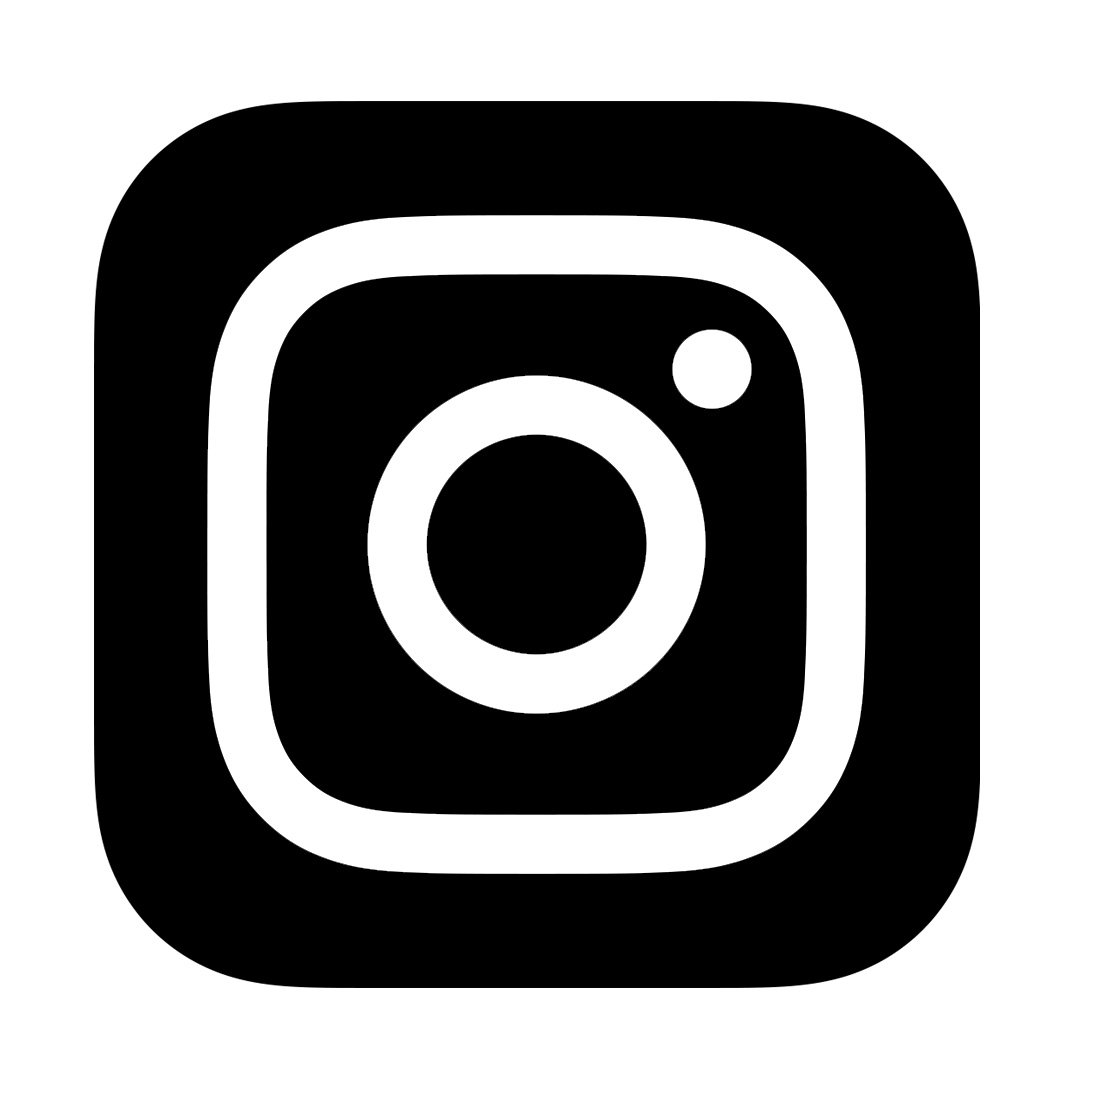 Instagram Logo, Instagram Symbol Meaning, History and ...